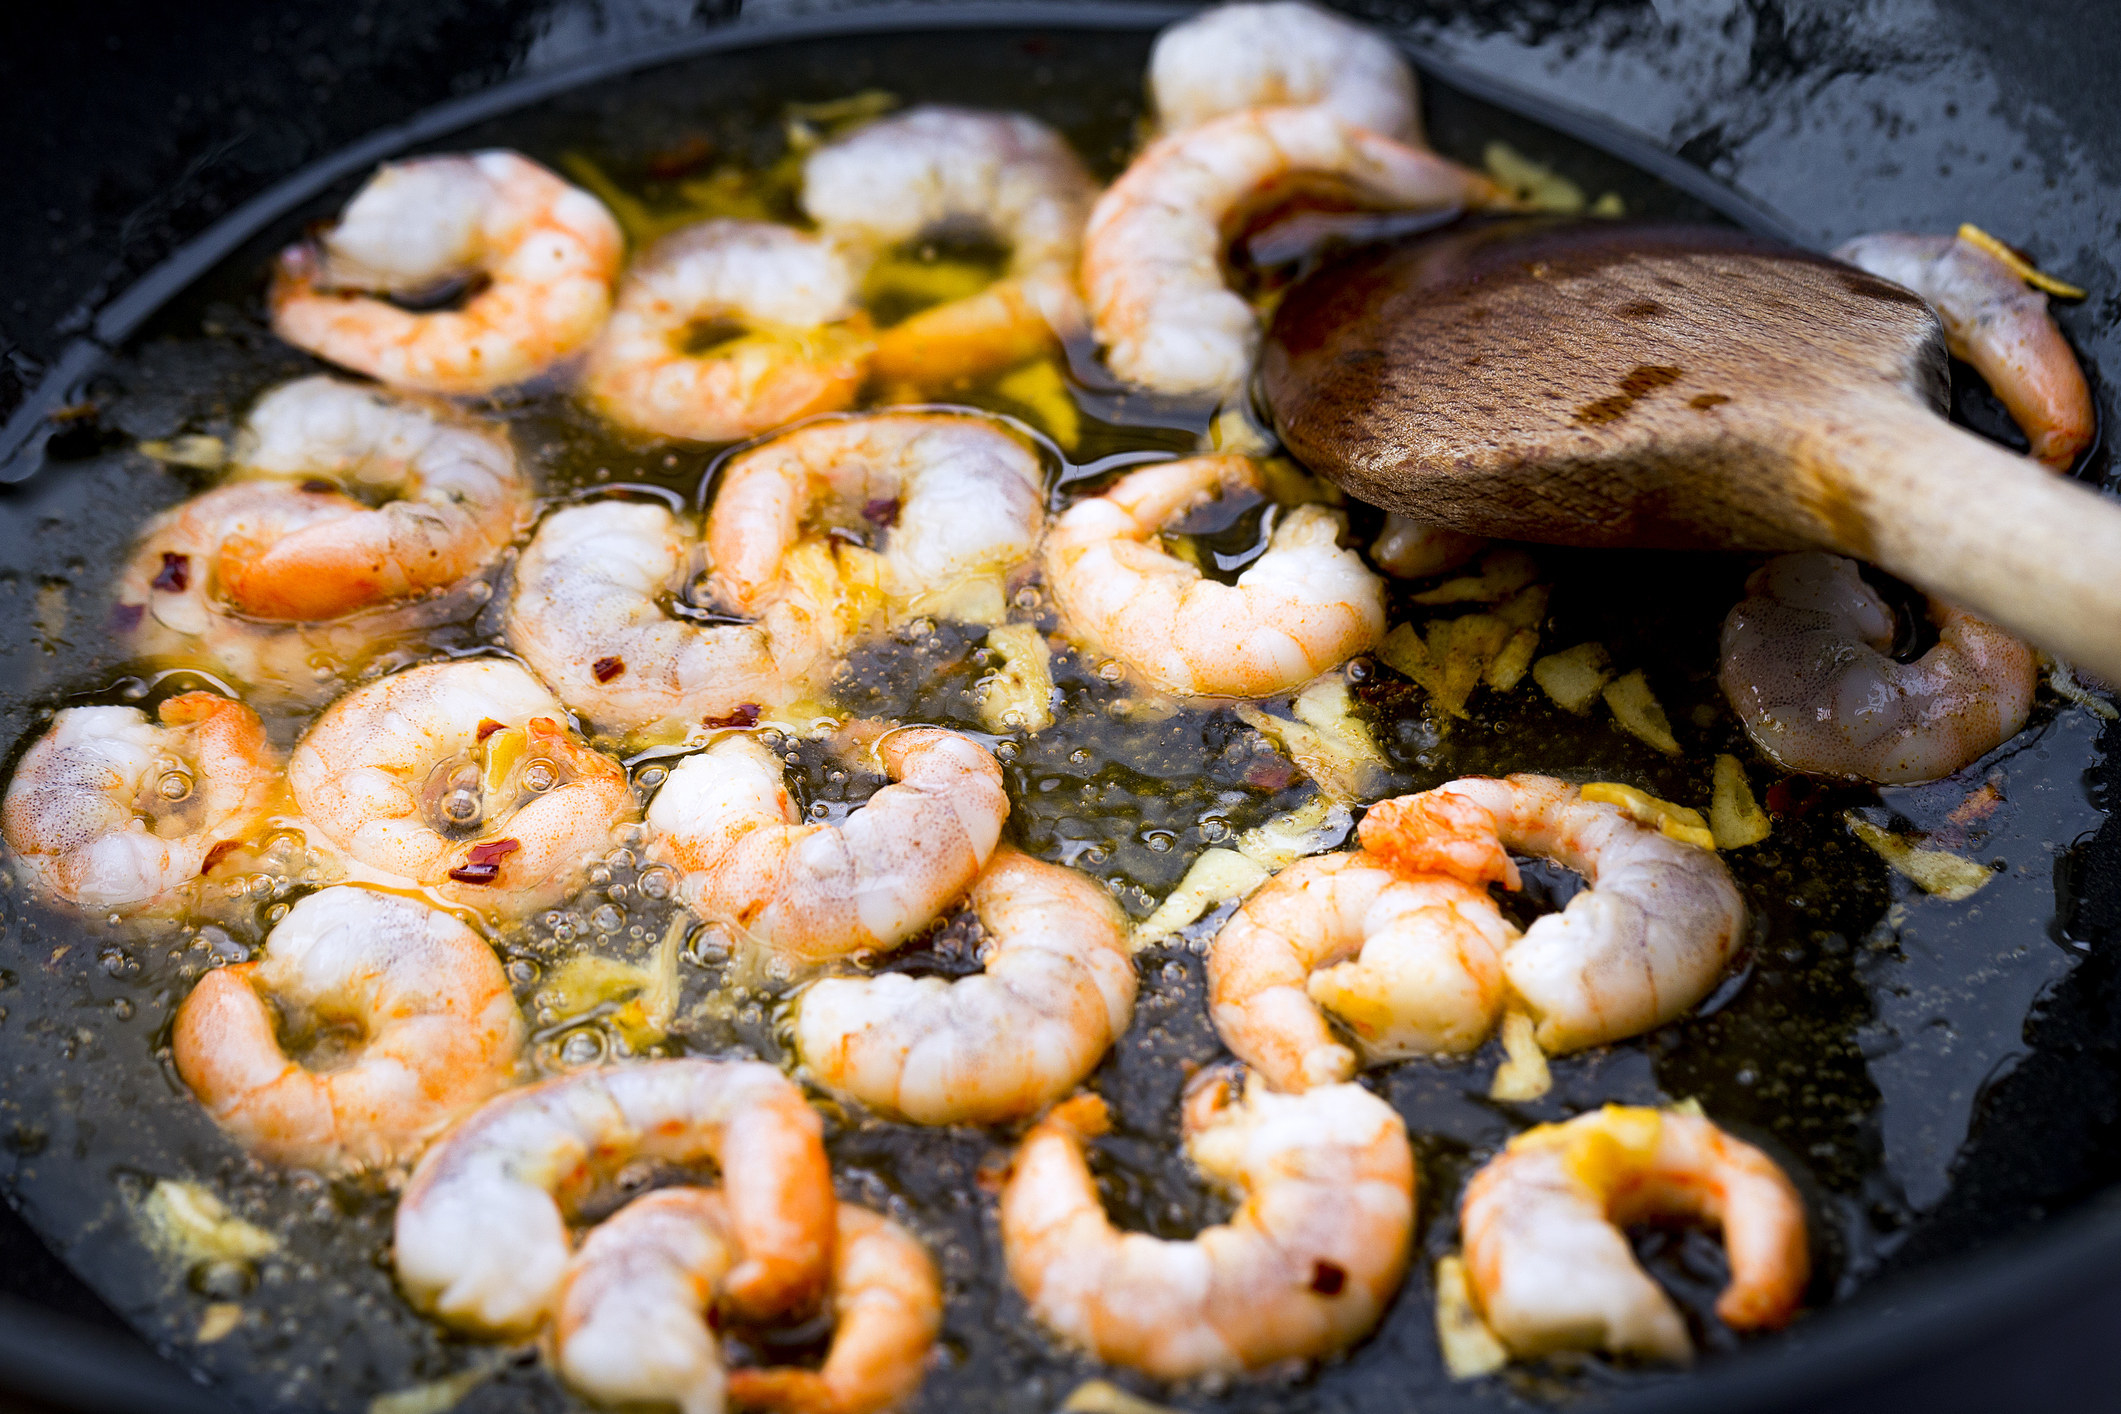 Garlic frying in oil with shrimp.